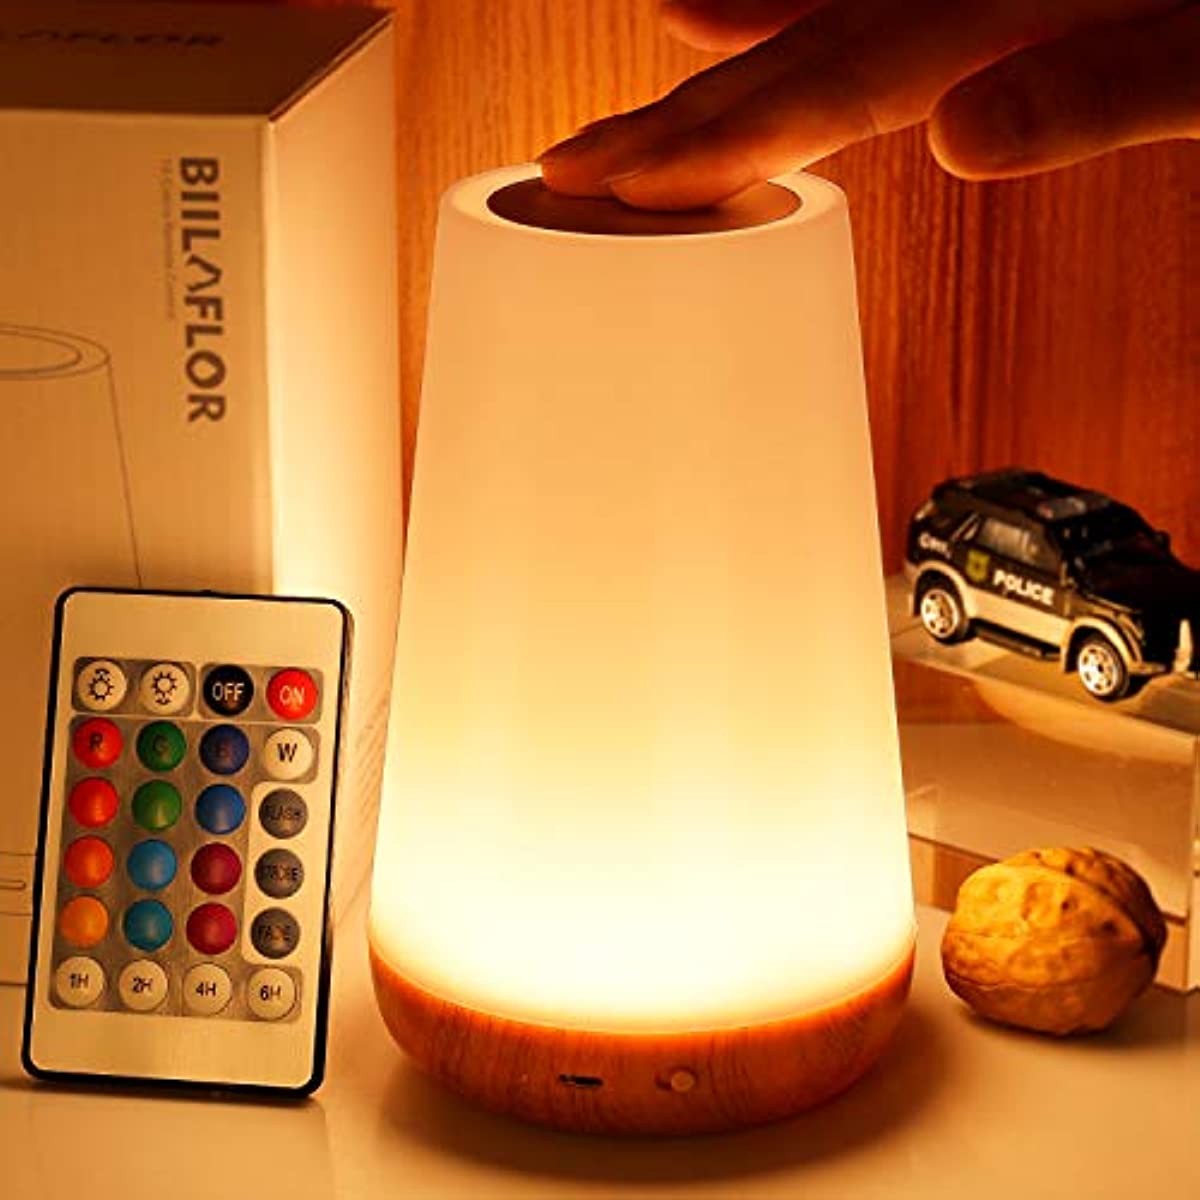 One Fire Battery Operated Lamp Small Desk Lamp Foldable & Portable Light,8 Brightness Rechargeable Lamp Wireless Lamp Mini Lamp,Dimmable Battery